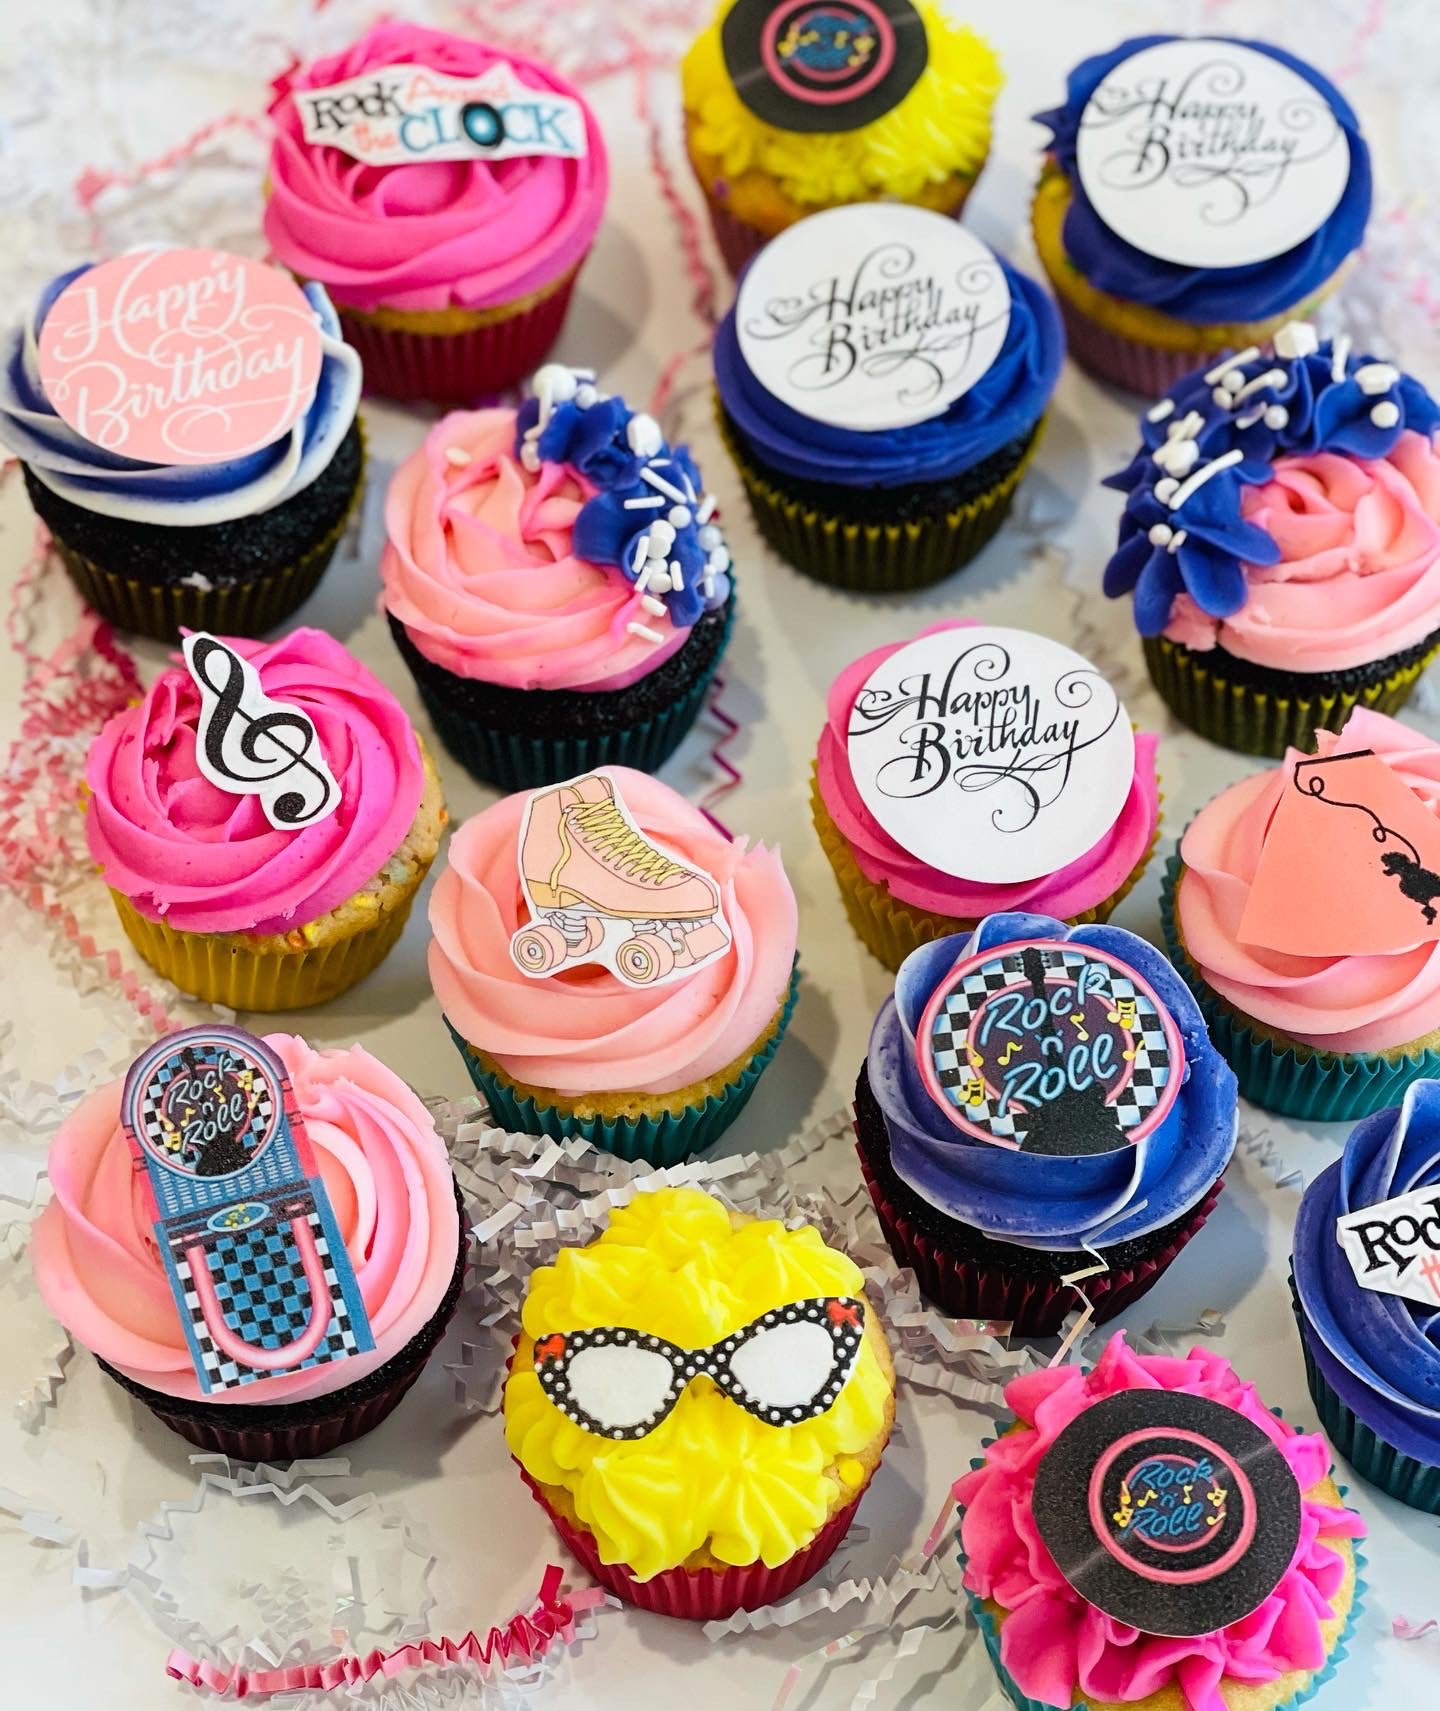 Rock & Roll Bday Cupcakes